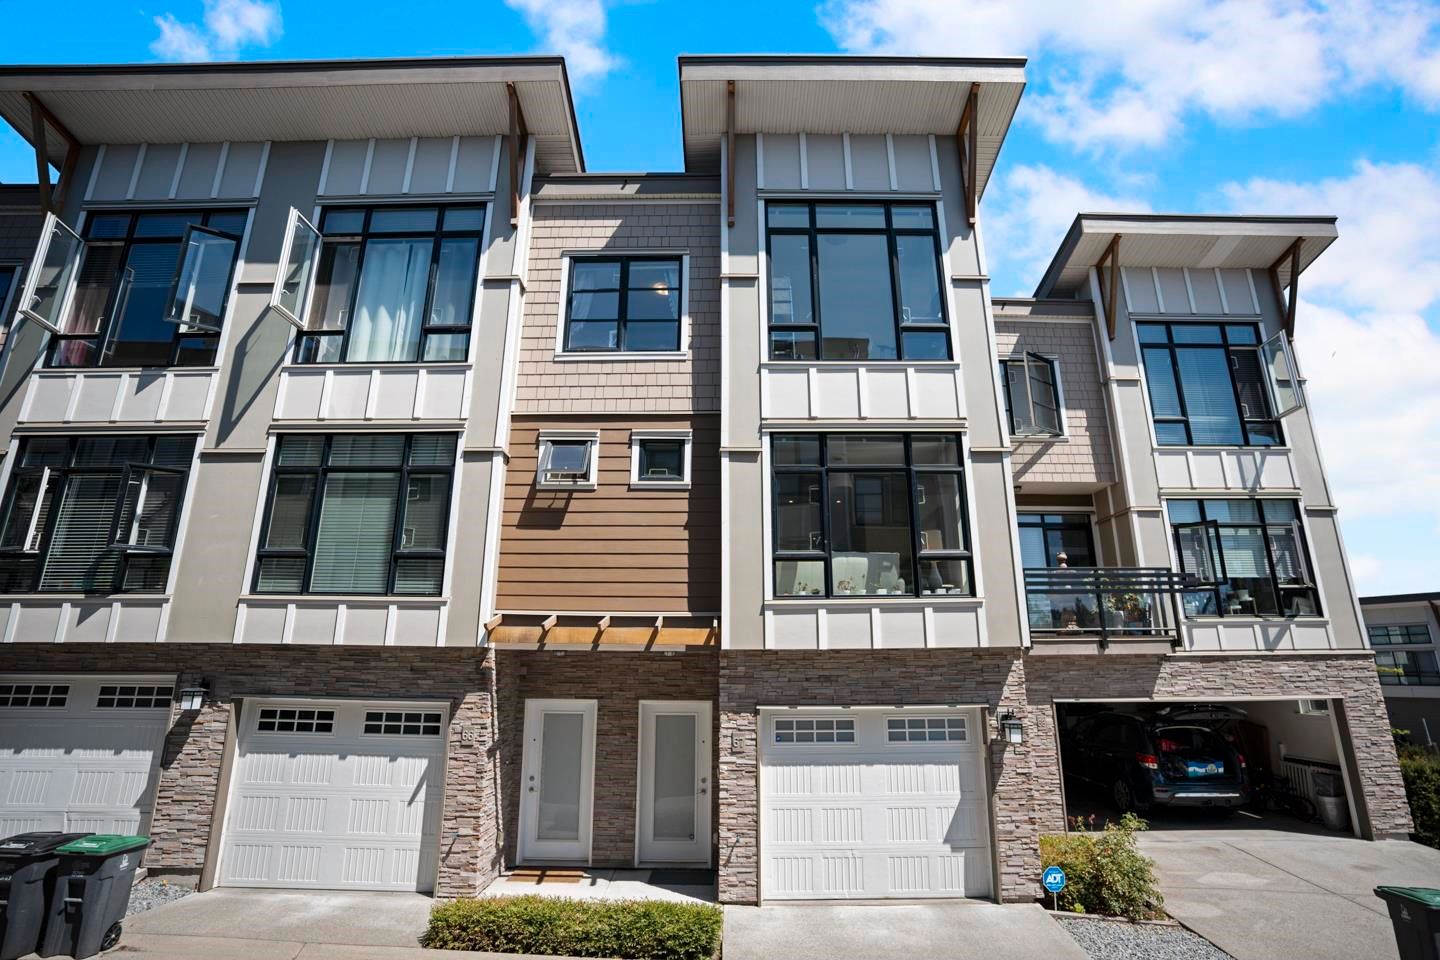 Main Photo: 67 9989 BARNSTON DRIVE in Surrey: Fraser Heights Townhouse for sale (North Surrey)  : MLS®# R2606291